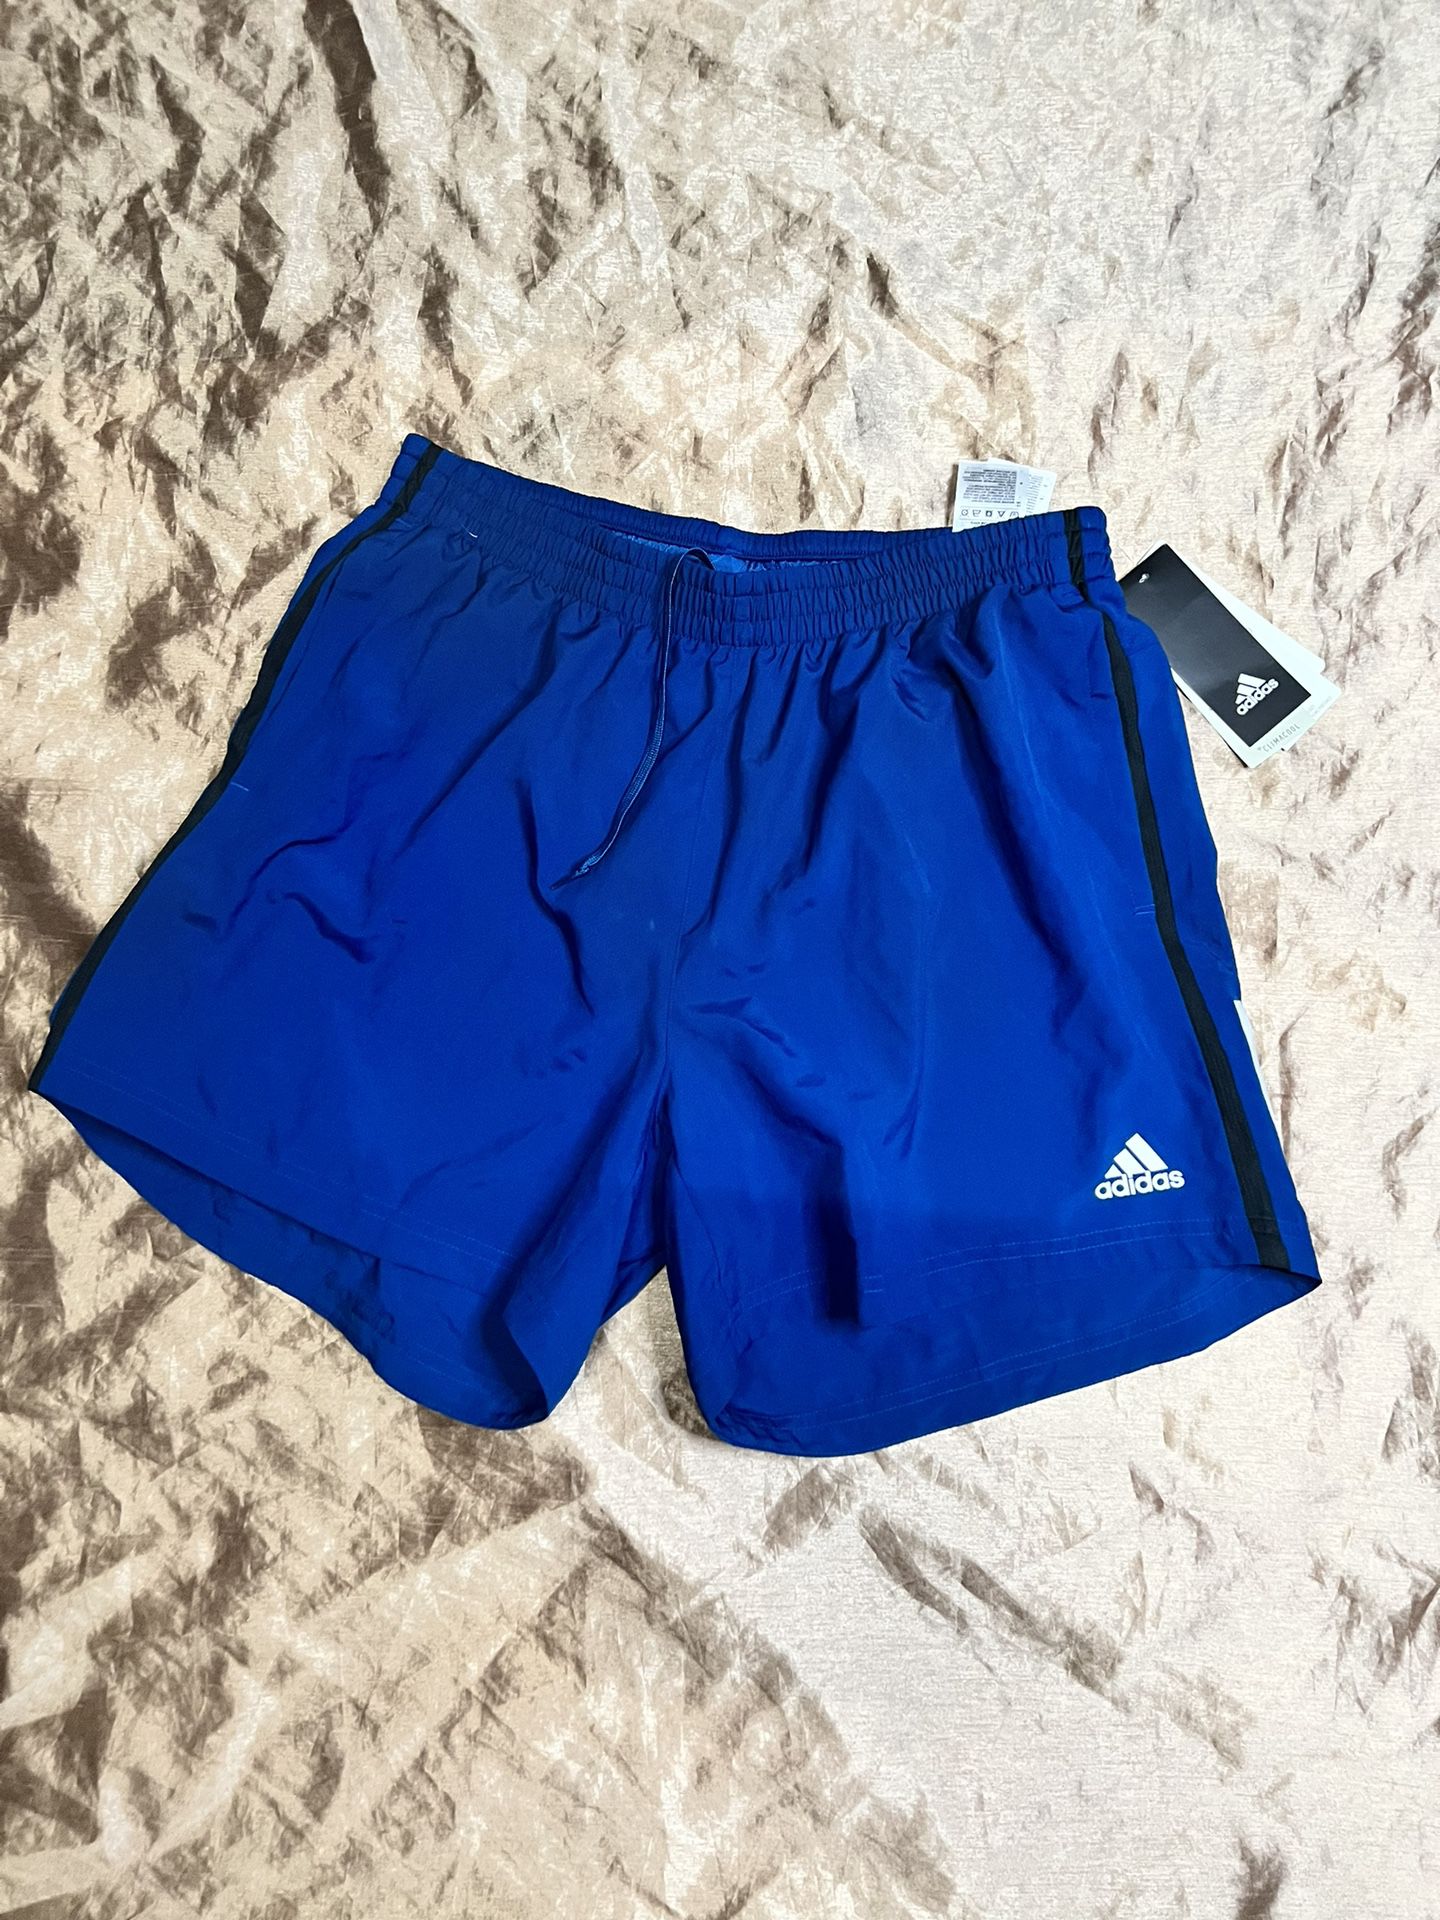 Magistrado Dependencia Ejecutante New adidas men's shorts size L5” OWN THE RUN DQ2555 legmar black running  climaco for Sale in Lakewood, CA - OfferUp